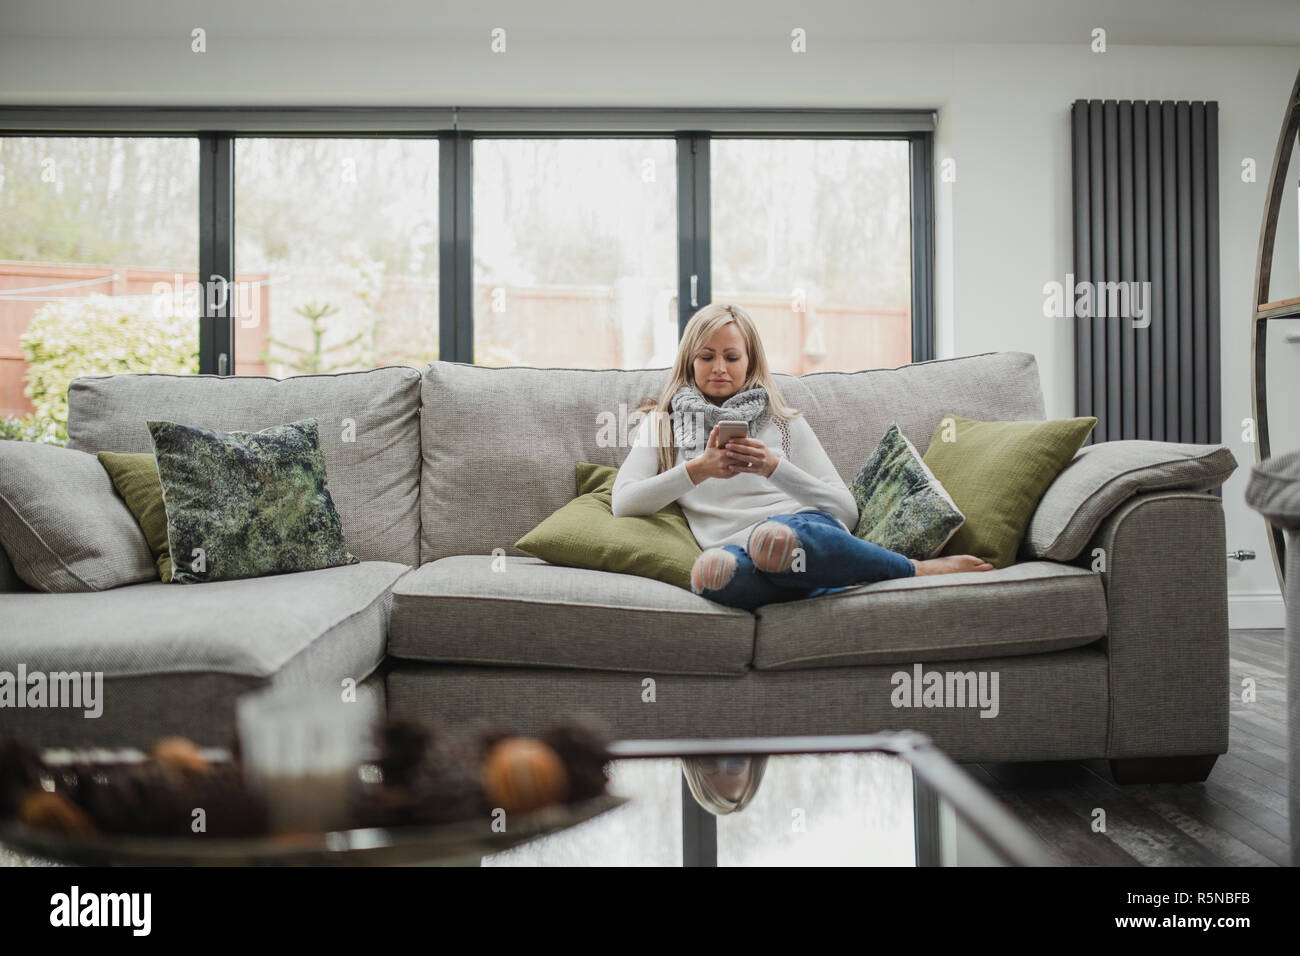 Woman Using Smartphone At Home Stock Photo